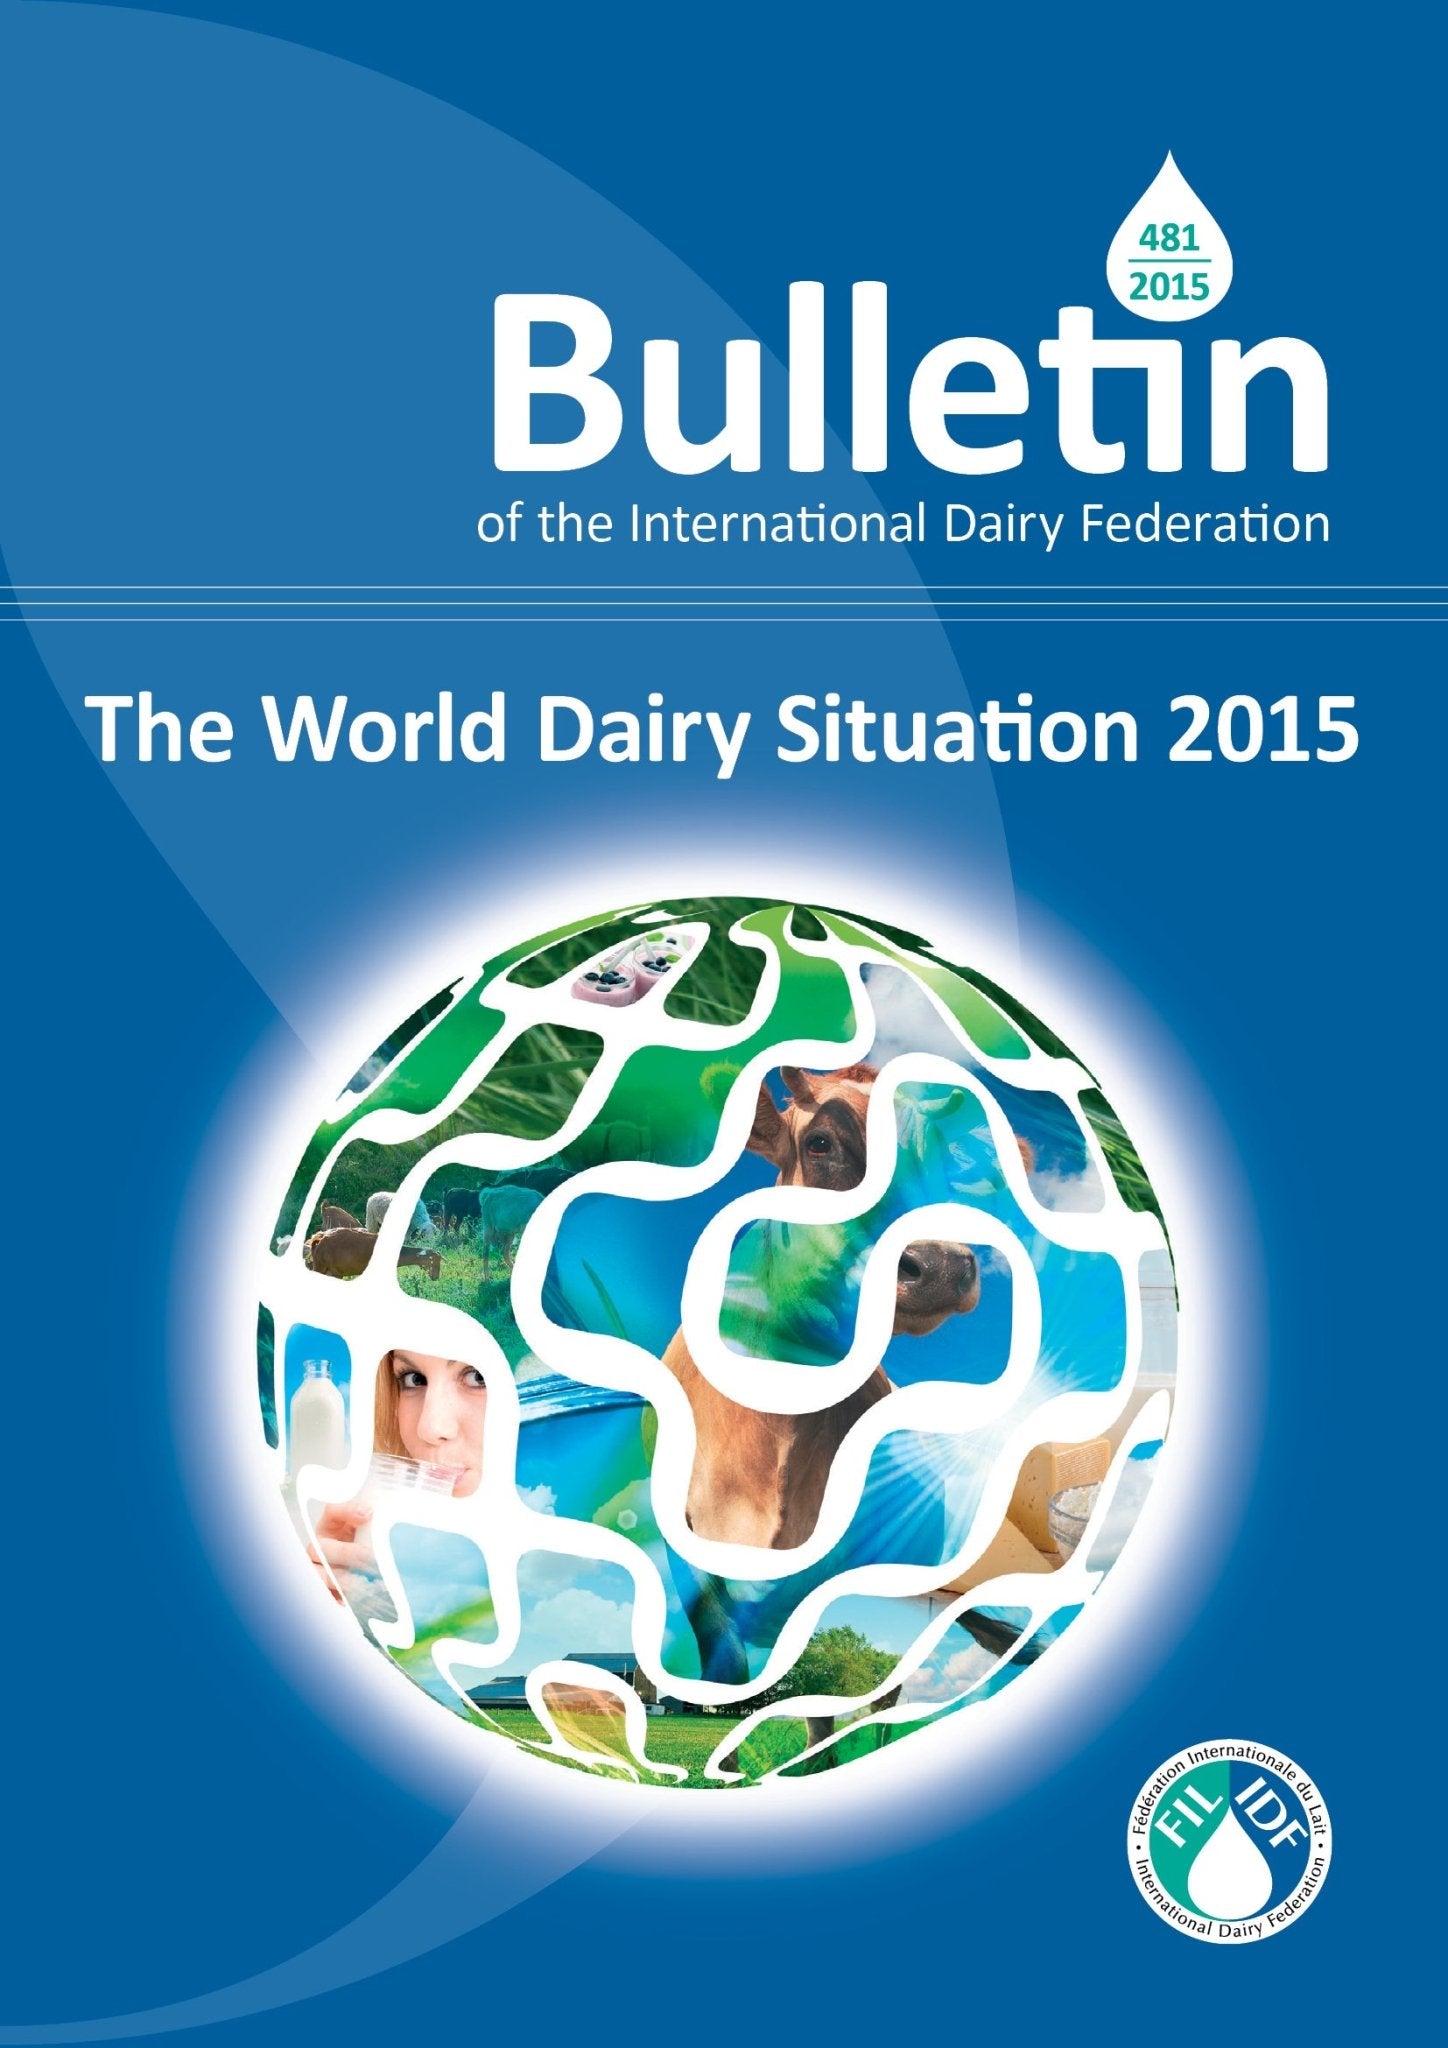 Bulletin of the IDF N° 481/ 2015: The World Dairy Situation 2015 - FIL-IDF